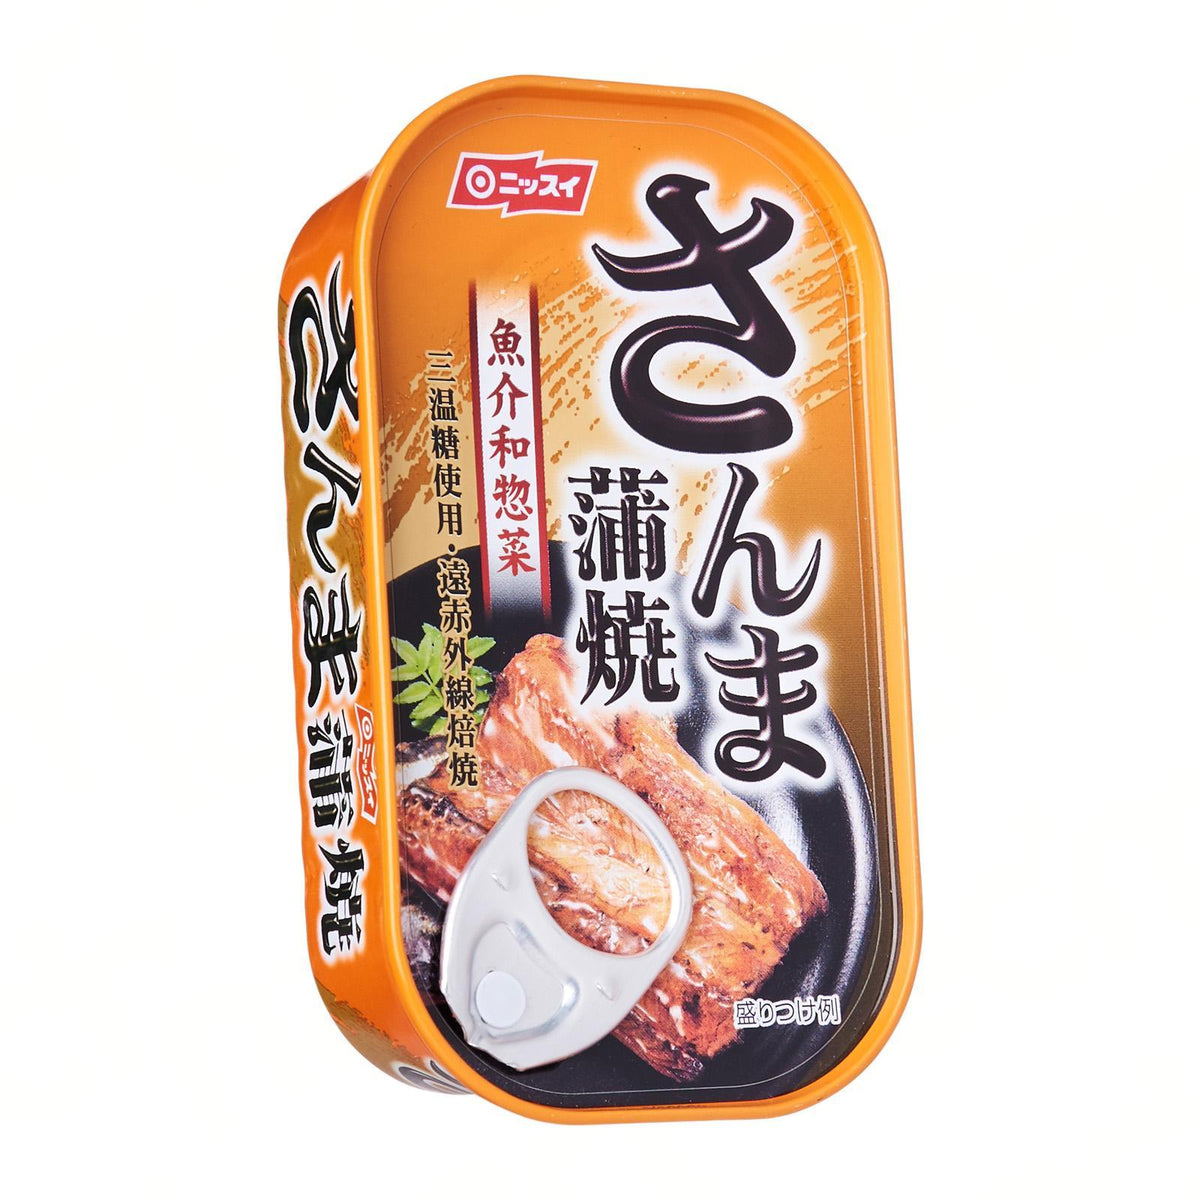 Online　さんま蒲焼　Honeydaes　Japanese　Foods　Sanma　Grocery　Canned　缶詰　Kabayaki　Japan　100g　—　Nissui　Foods